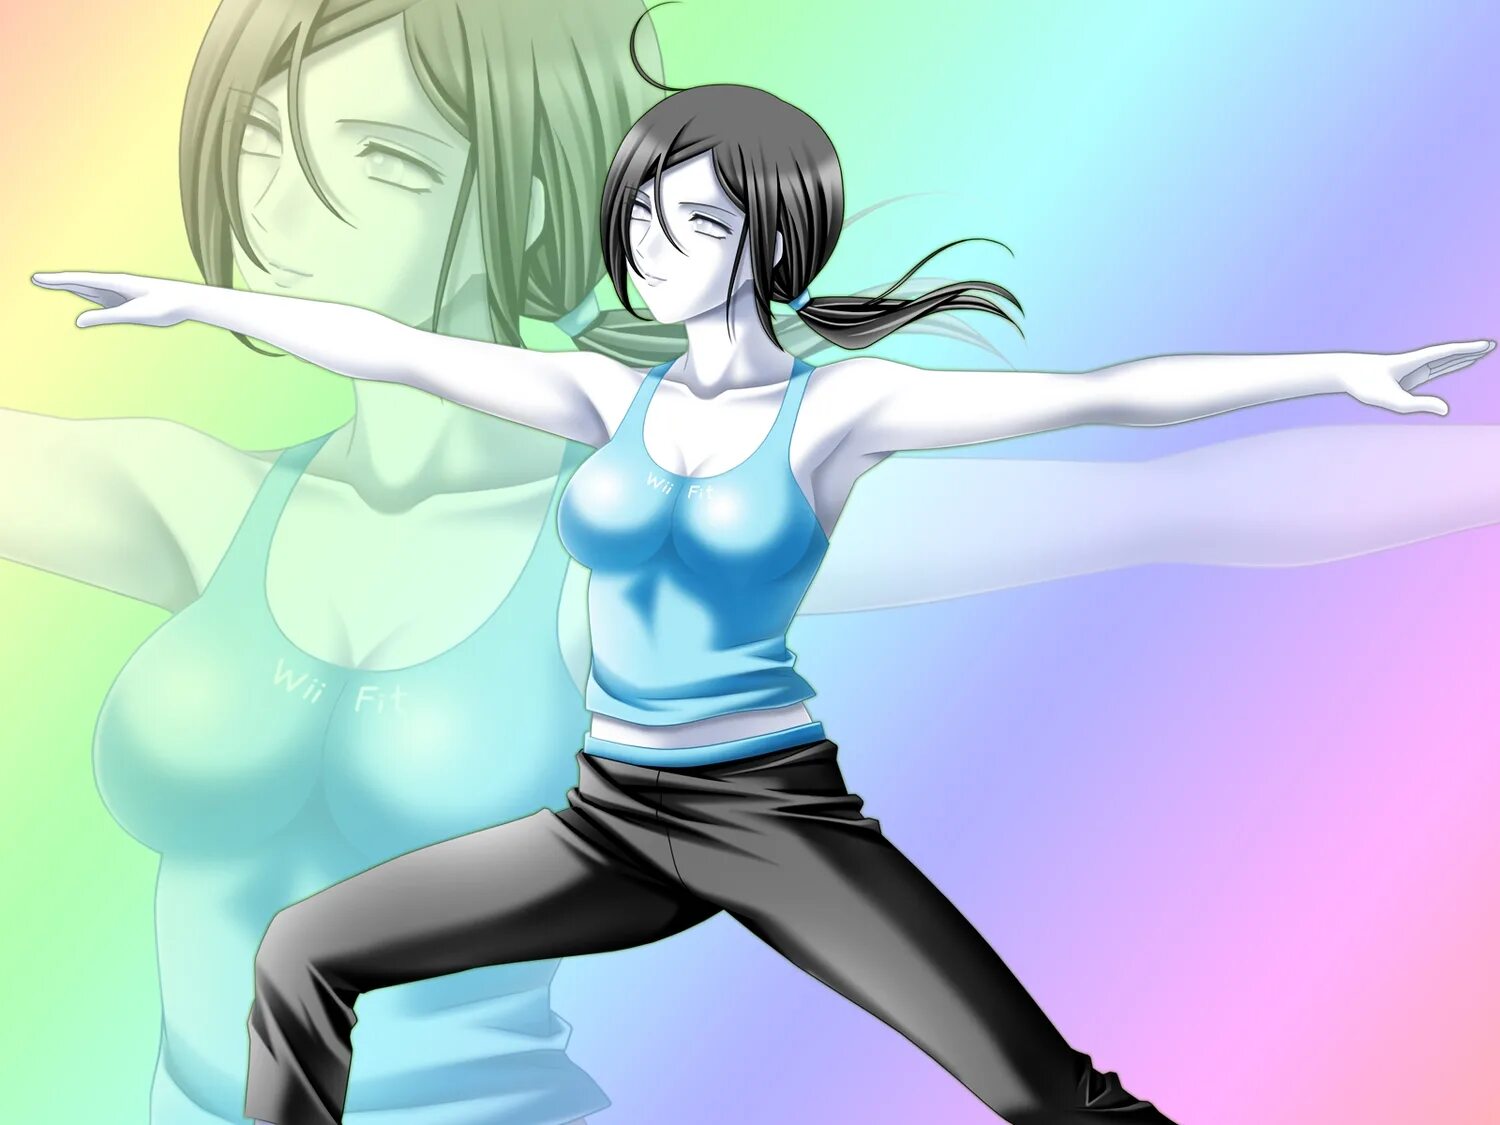 Nintendo Wii Fit Trainer. Нинтендо Wii Fit тренер. Wii Fit Trainer 34. Samus Aran and Wii Fit Trainer.